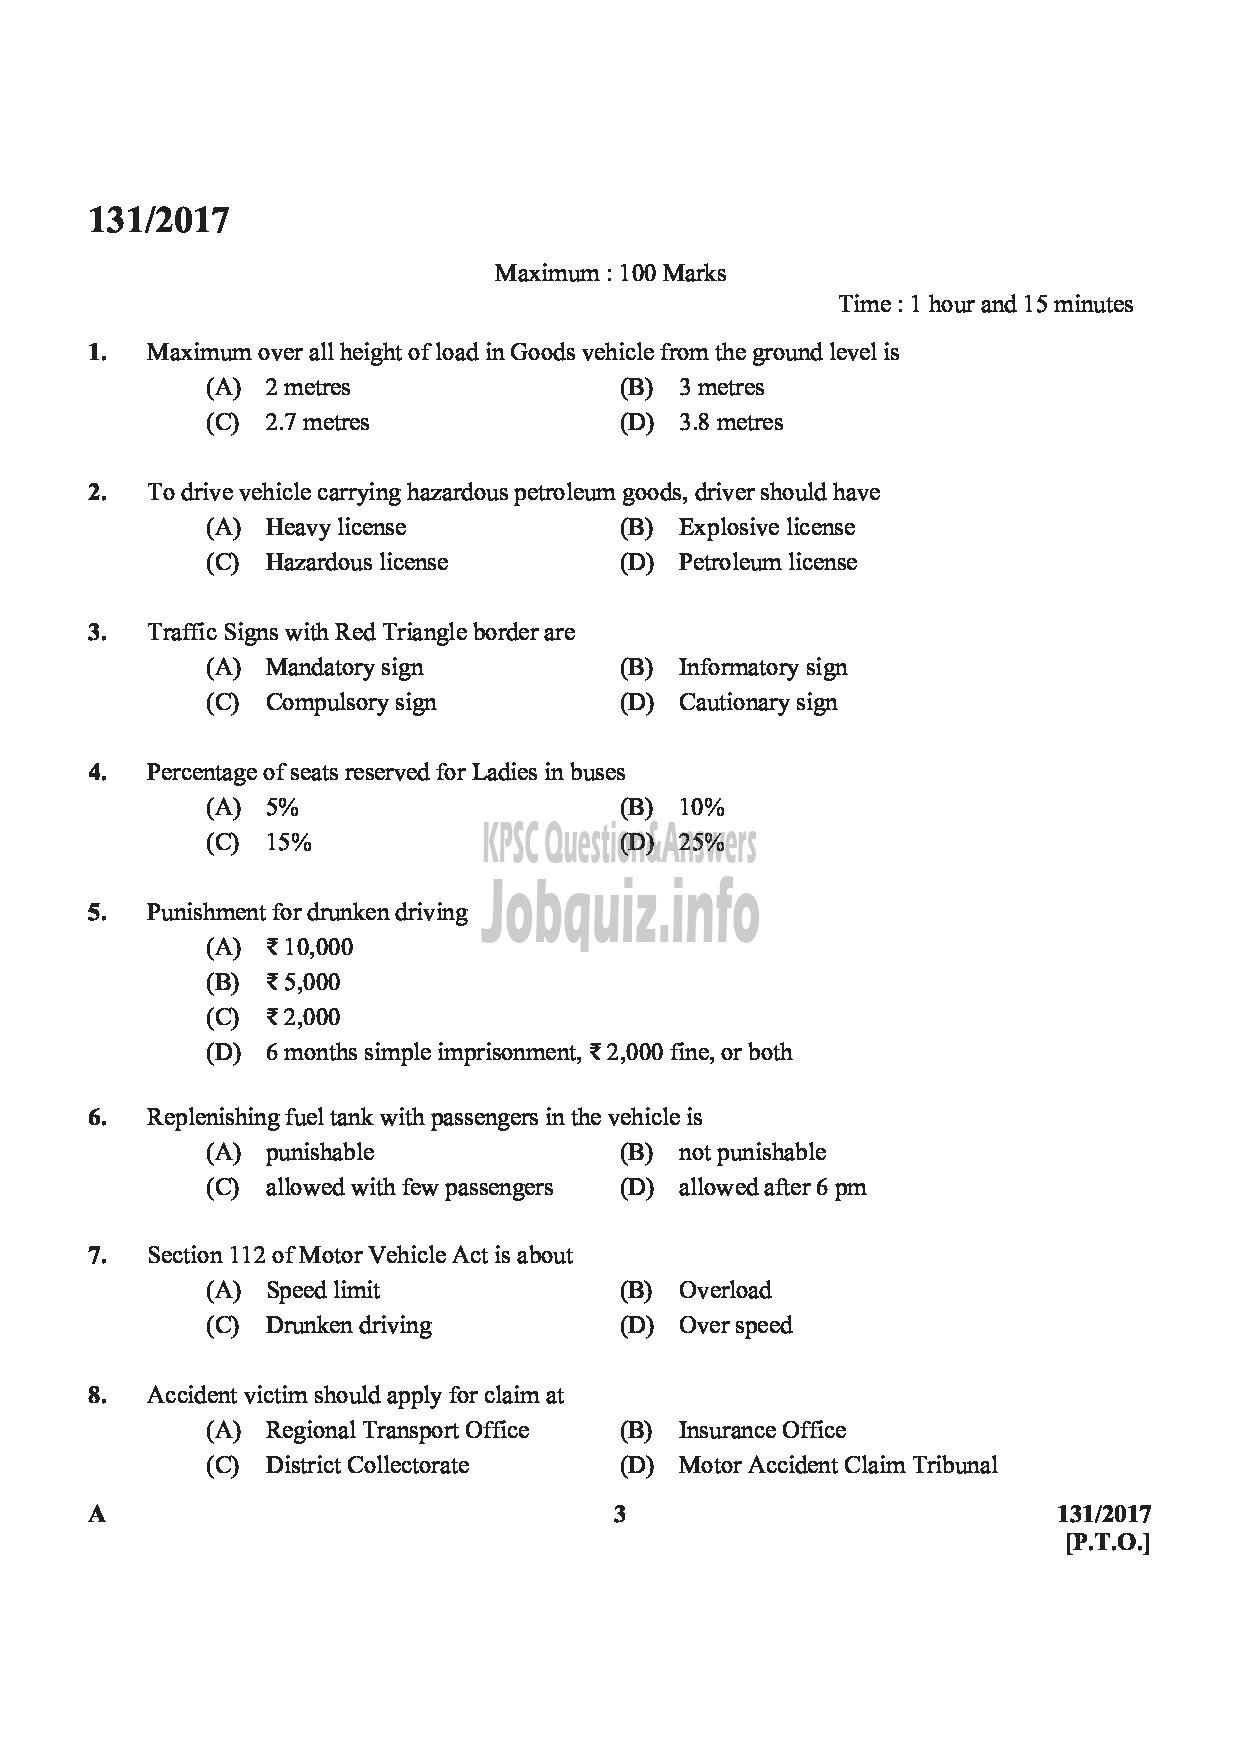 Kerala PSC Question Paper - FIREMAN DRIVER CUM PUMP OPERATOR TRAINEE SR FROM AMONG SC/ST ONLY FIRE AND RESCUE SERVICE-3